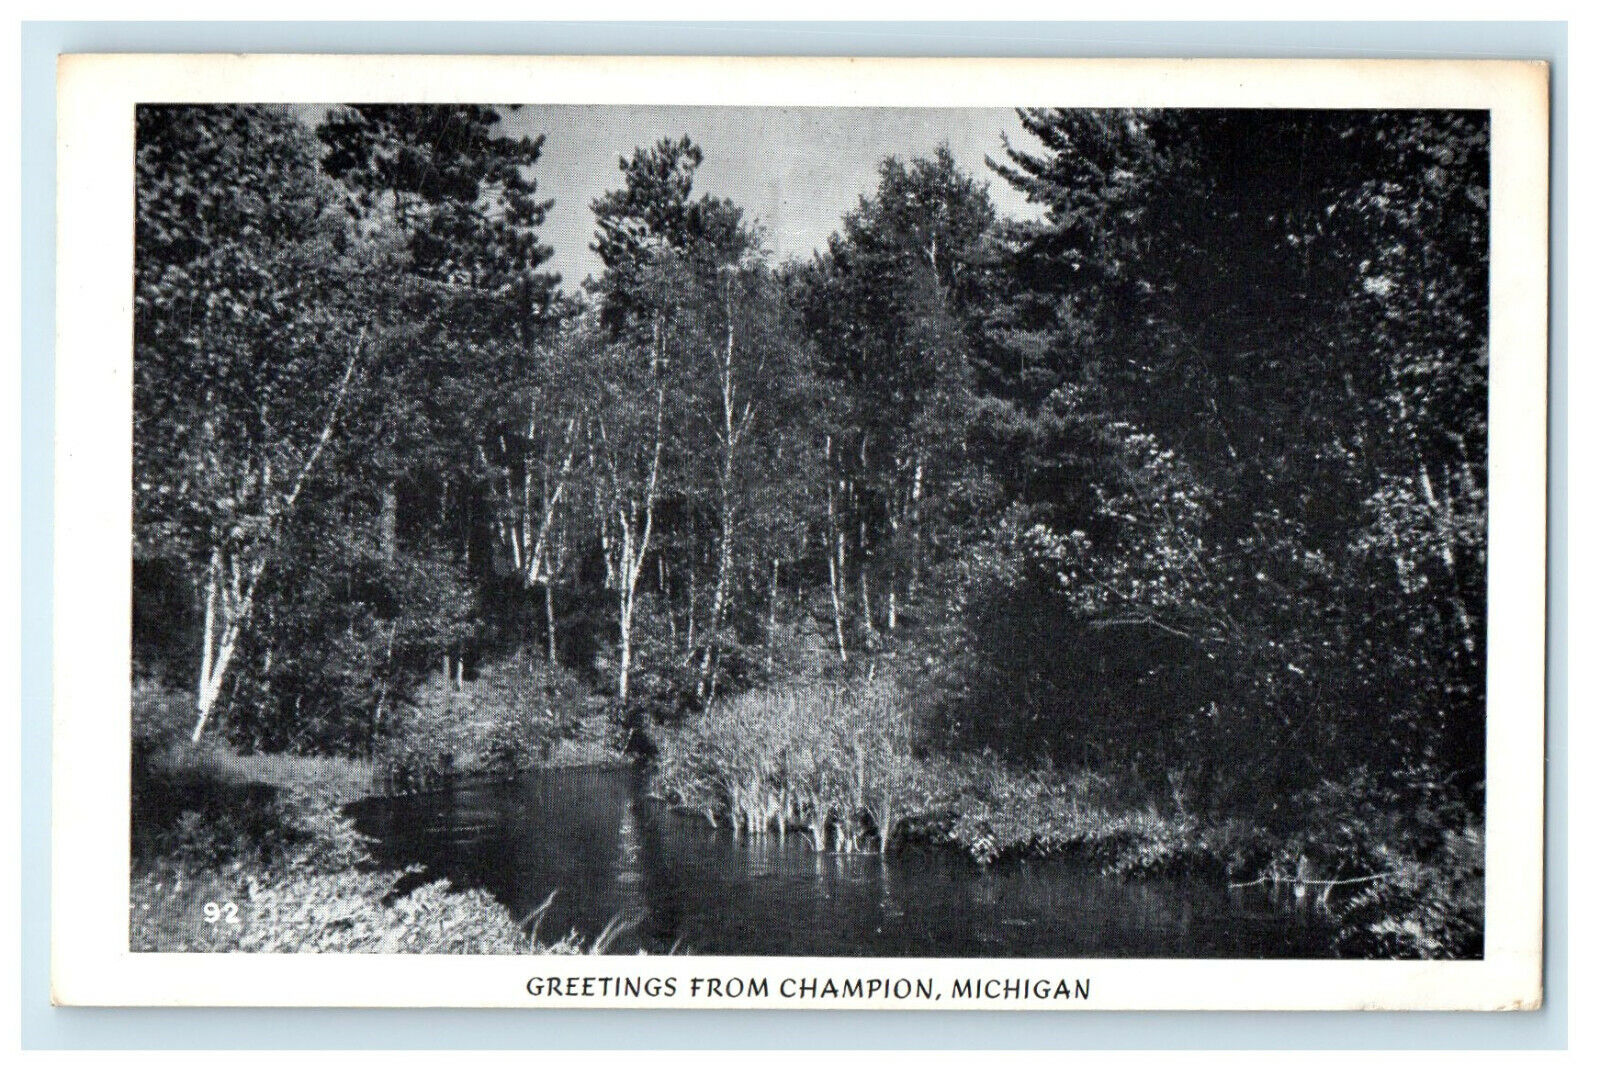 1947 River View, Greetings from Champion, Michigan Vintage Posted Postcard